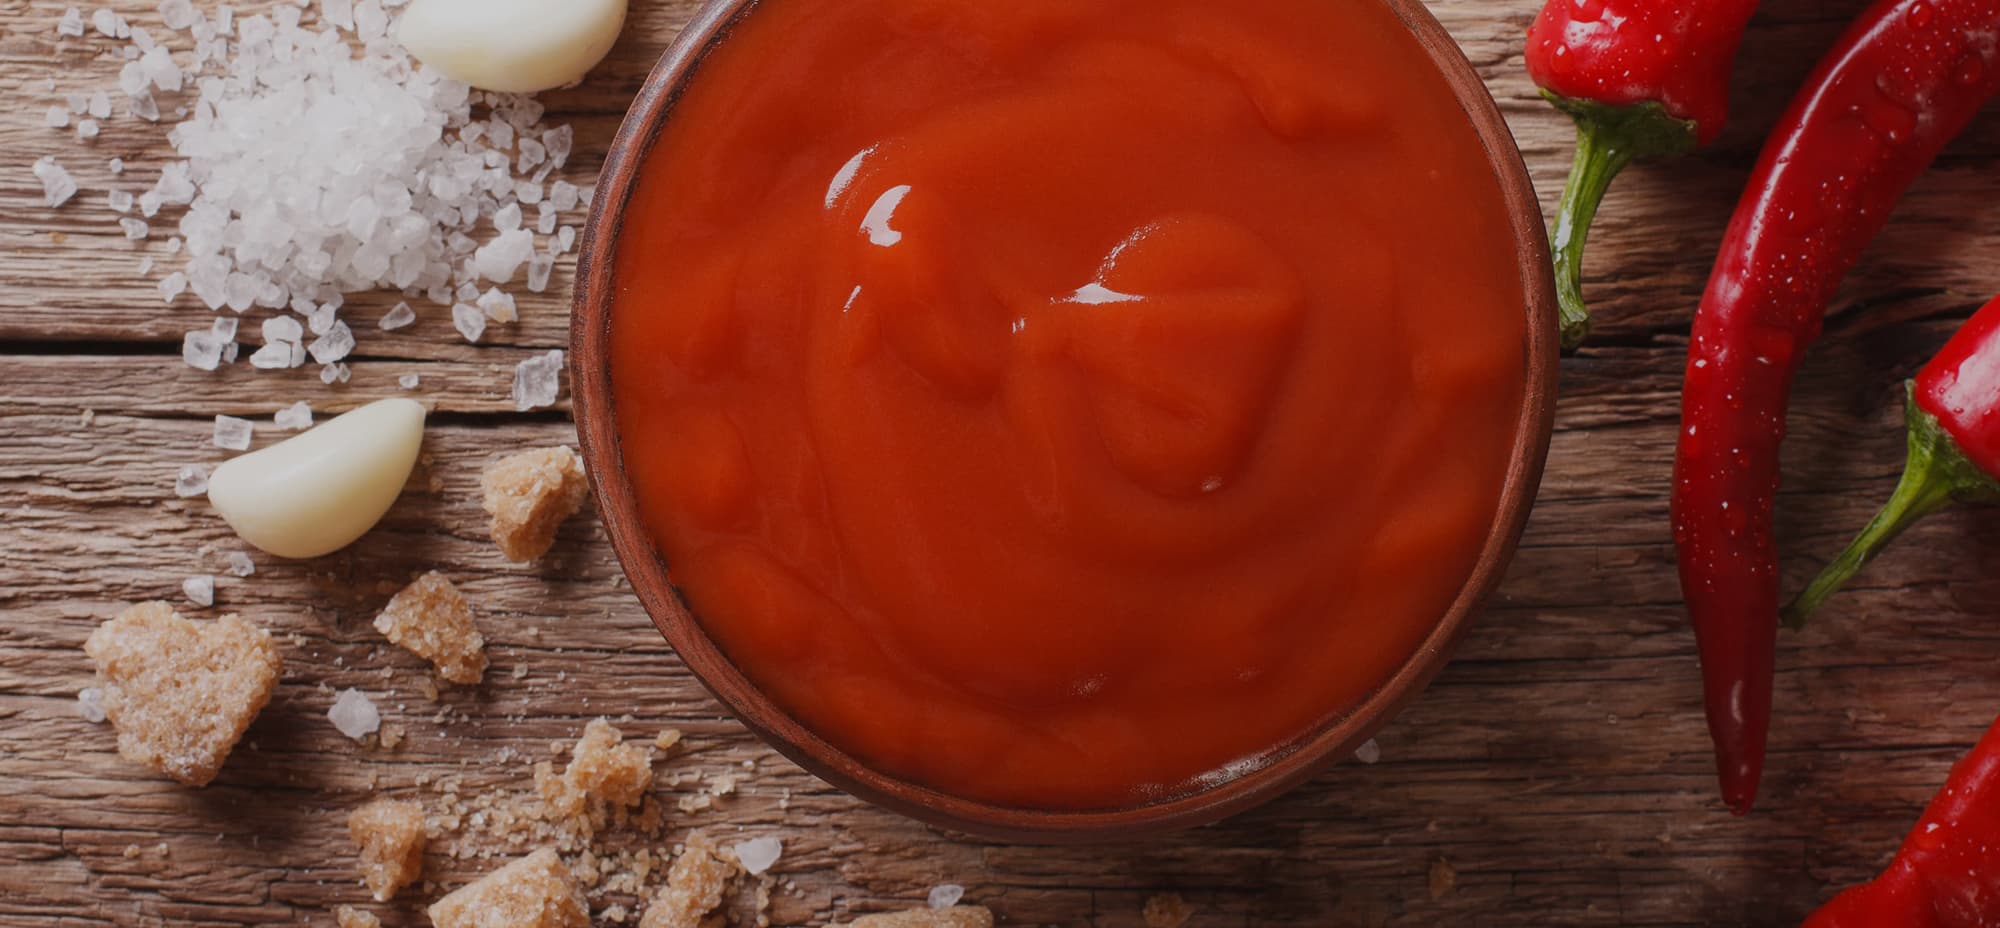 Image of a serving or sriracha sauce